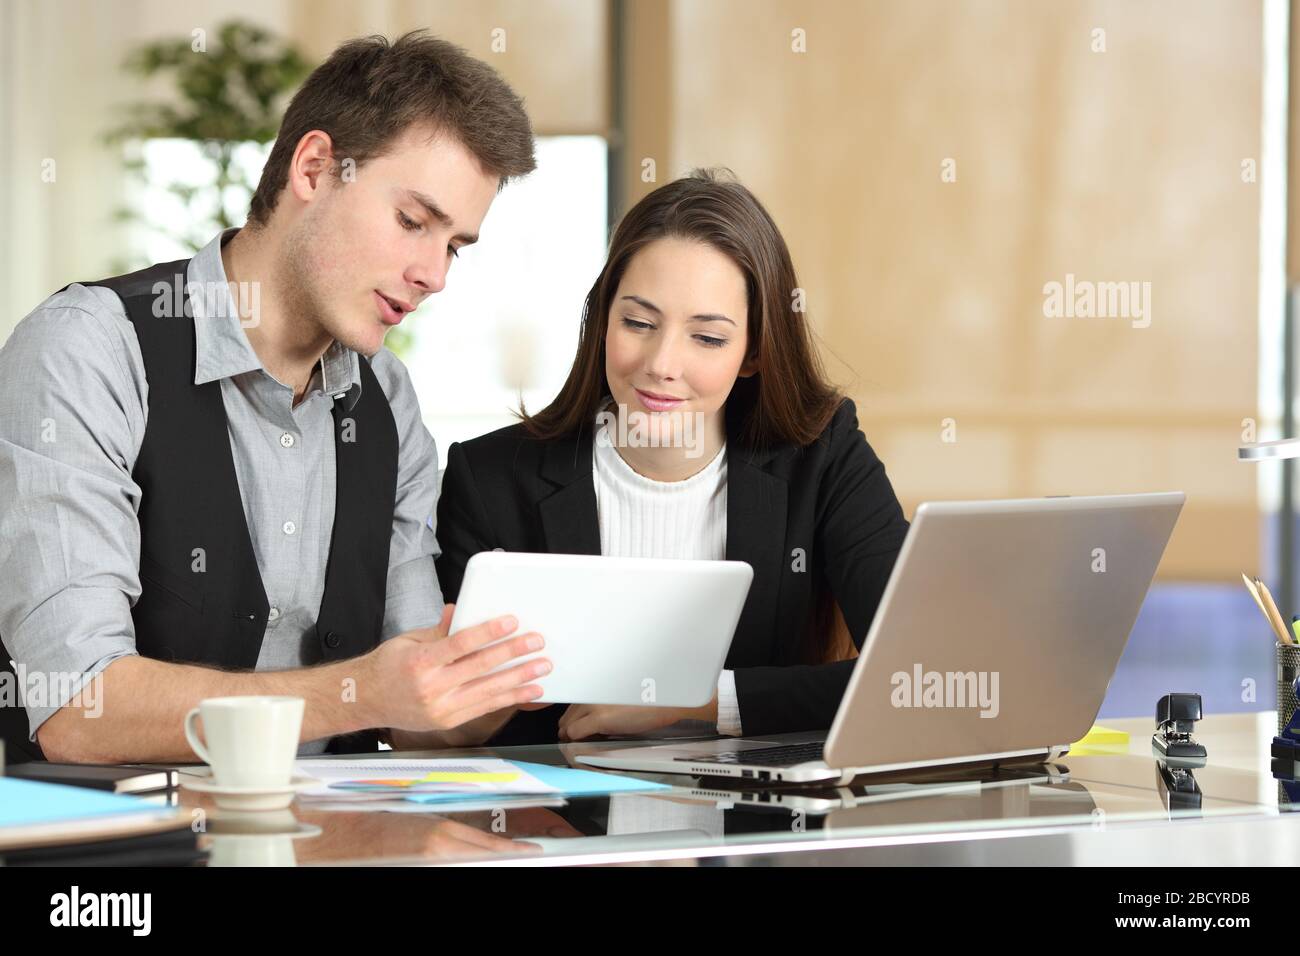 Man employee helping coworker girl showing tablet sitting at office desk Stock Photo